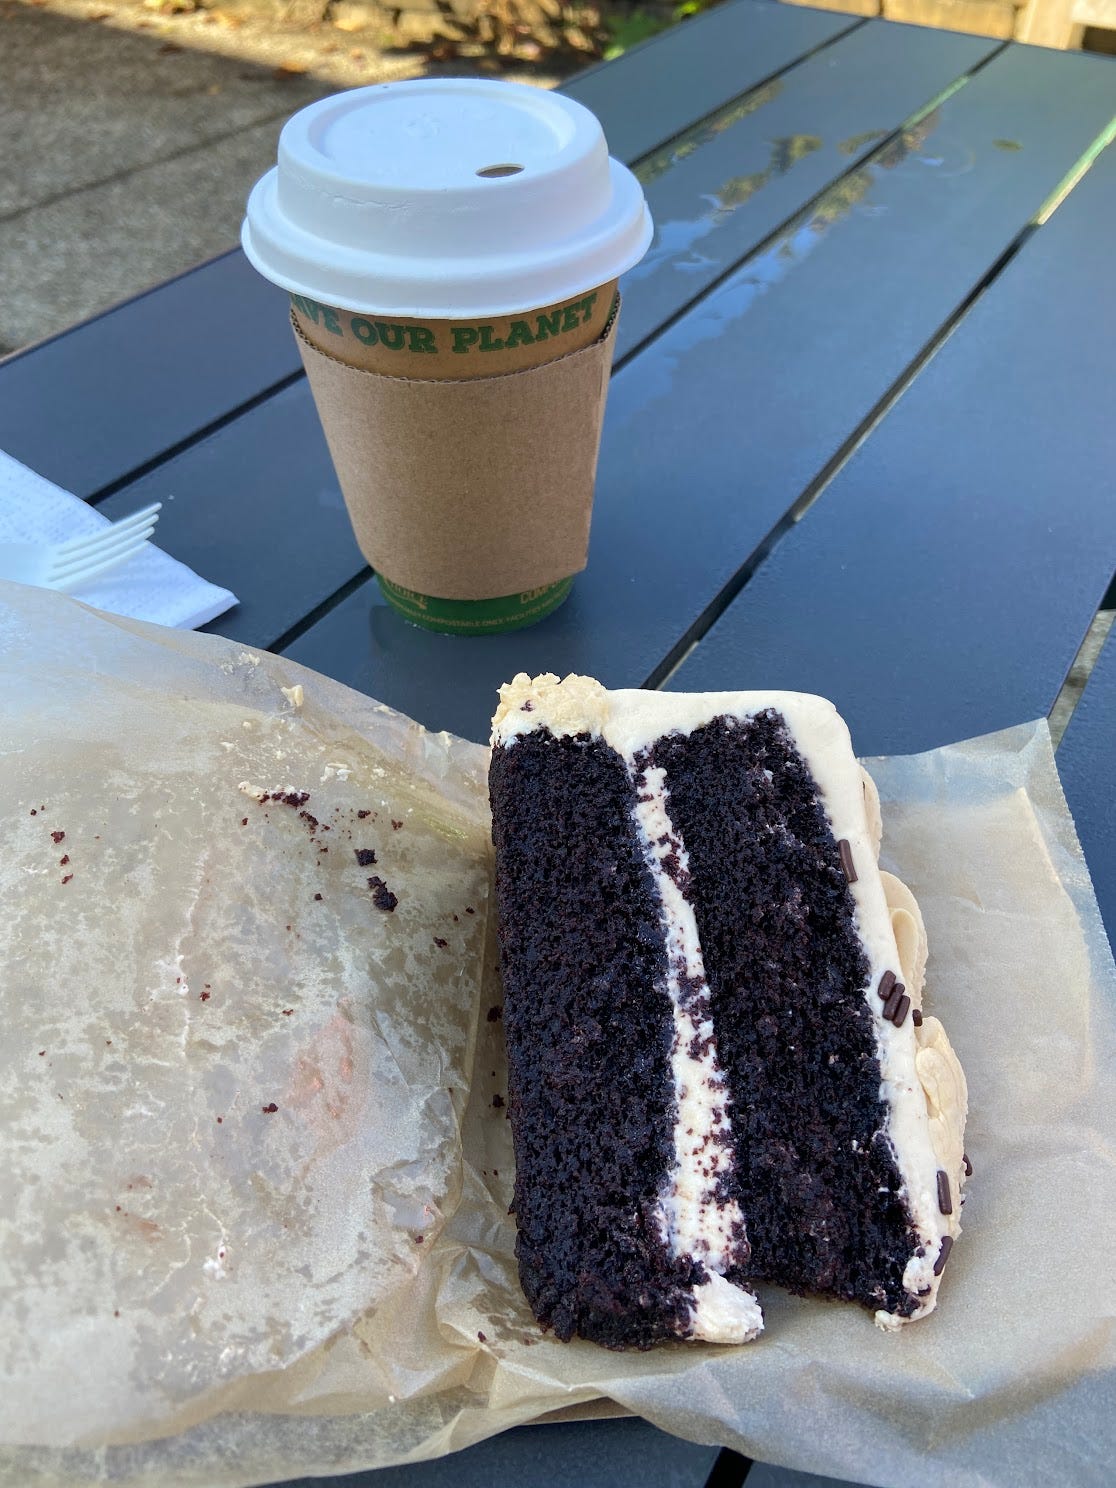 A piece of chocolate salted caramel cake and a to-go cup of coffee on a black picnic table.